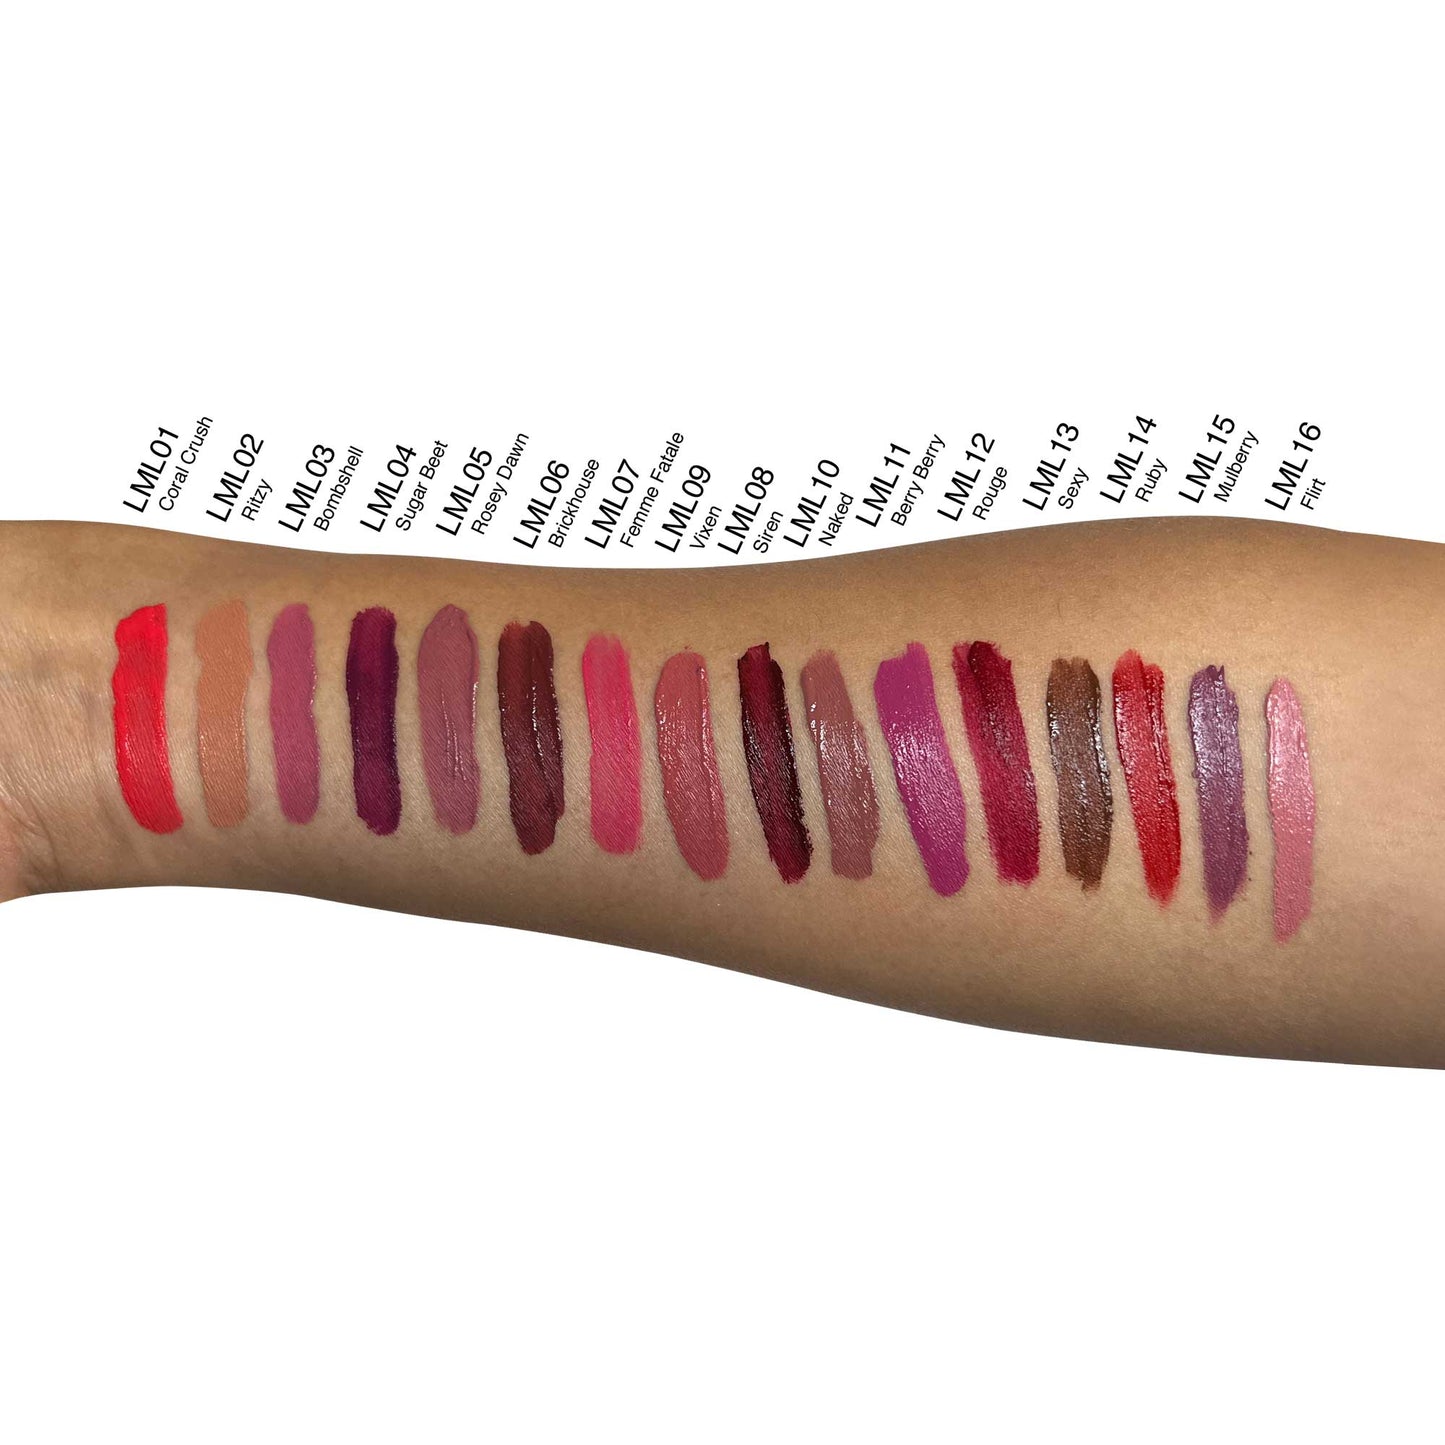 Cruisin Organics Berry Berry Liquid to Matte Lipstick is a pocket-friendly lipstick that perfectly fits in your back pocket and embodies the newest color trends while being comfortable for all day usage. Absorb yourself in the world of intensely berry-hued hues, appropriate for any setting. 